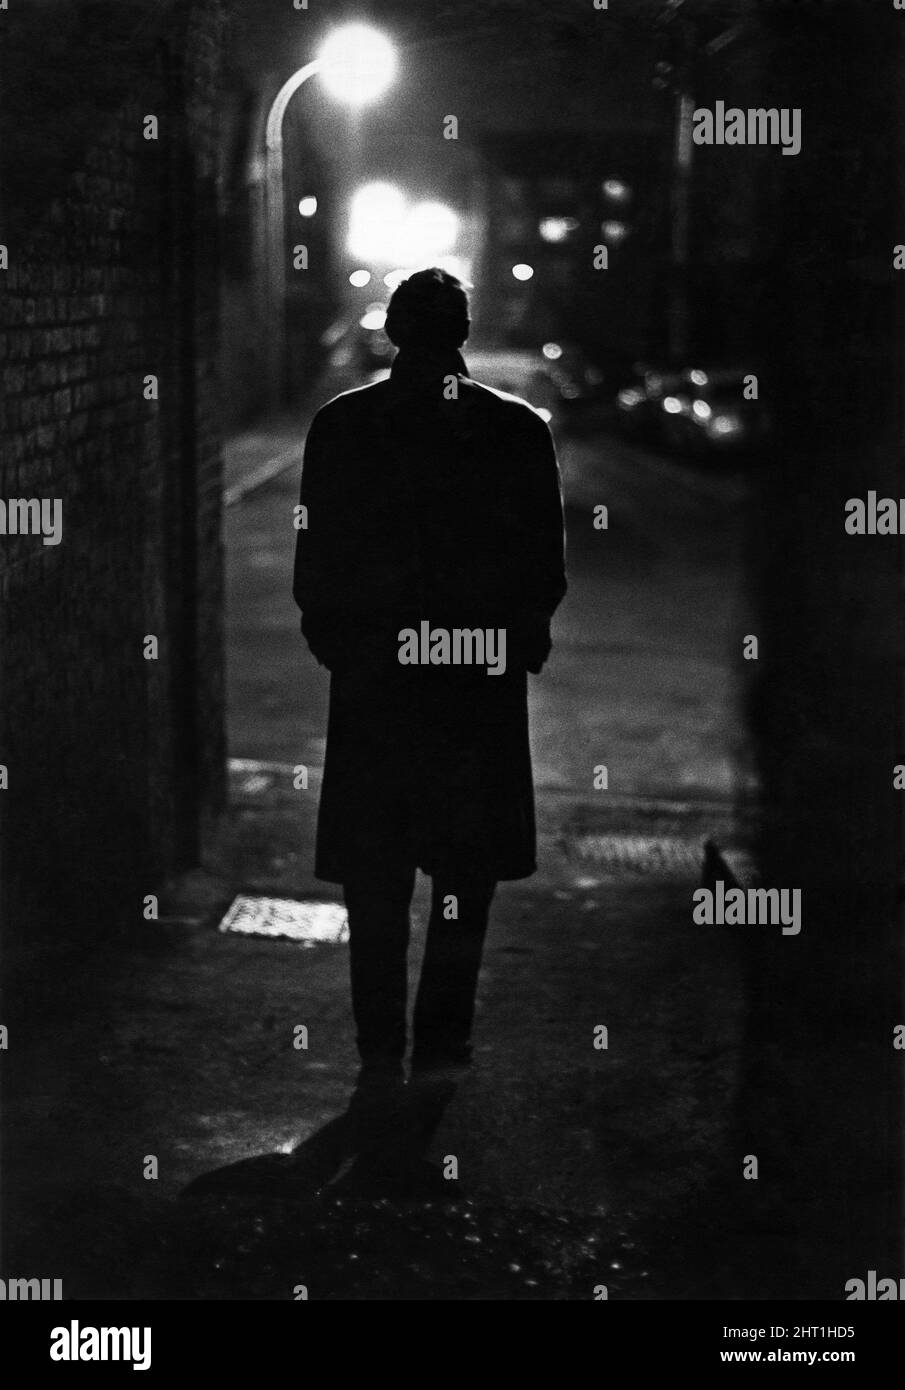 Avoiding the brightly lit thoroughfares of London, a National Service deserter dodges with the shadows in the back streets of the East End. February 1965 P035482 Stock Photo